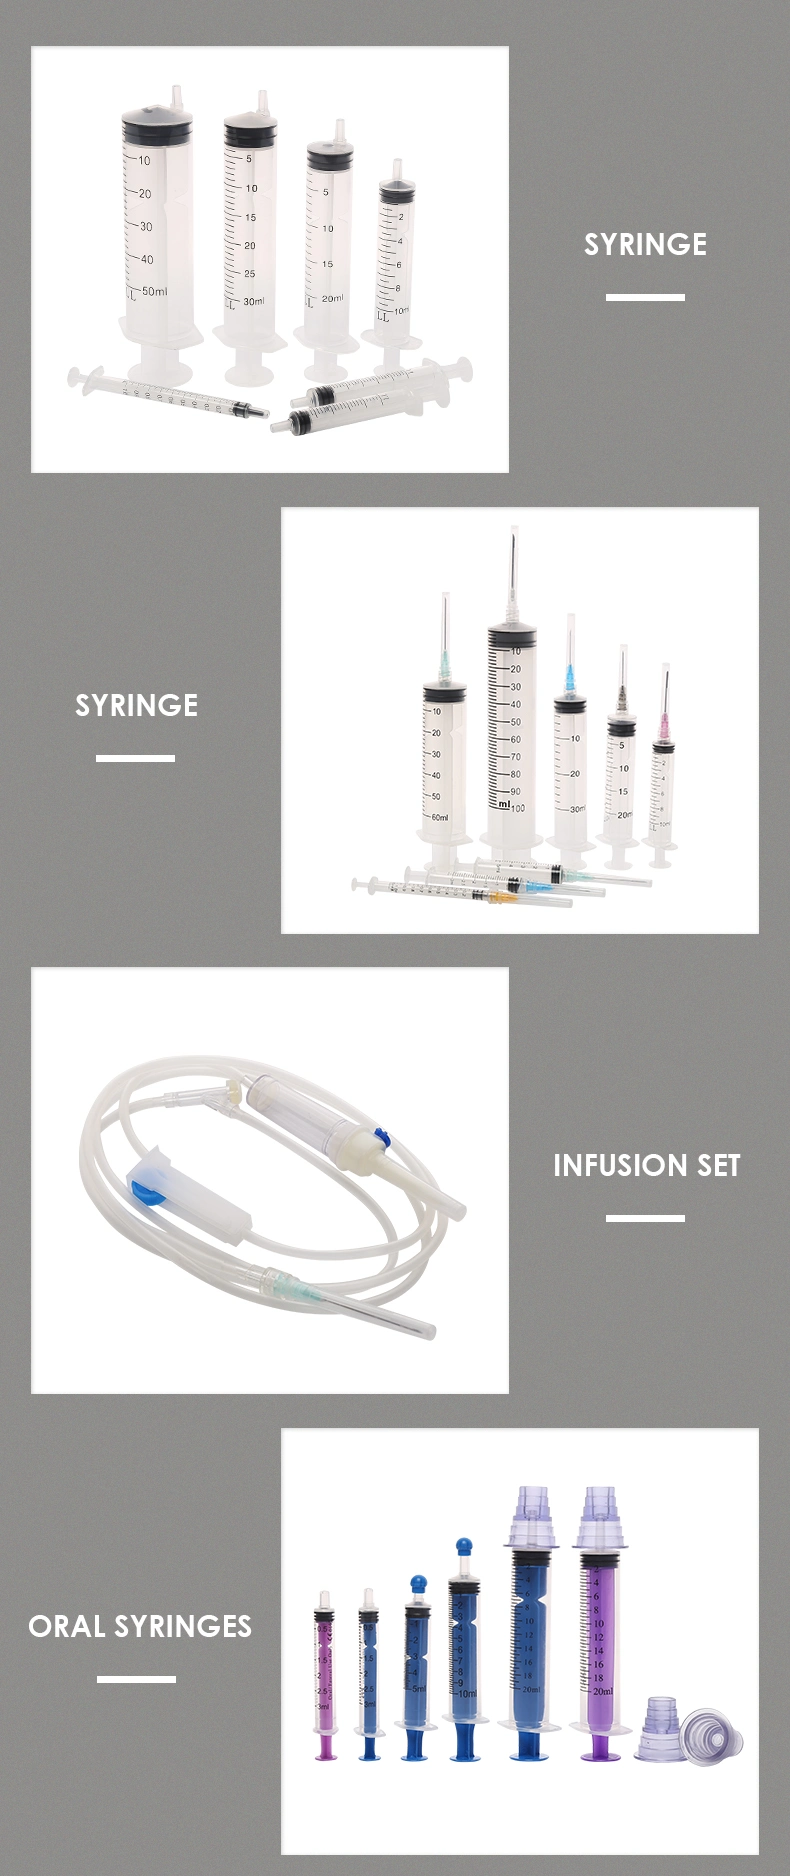 Disposable Scalp Vein Set 21g Withe CE ISO13485